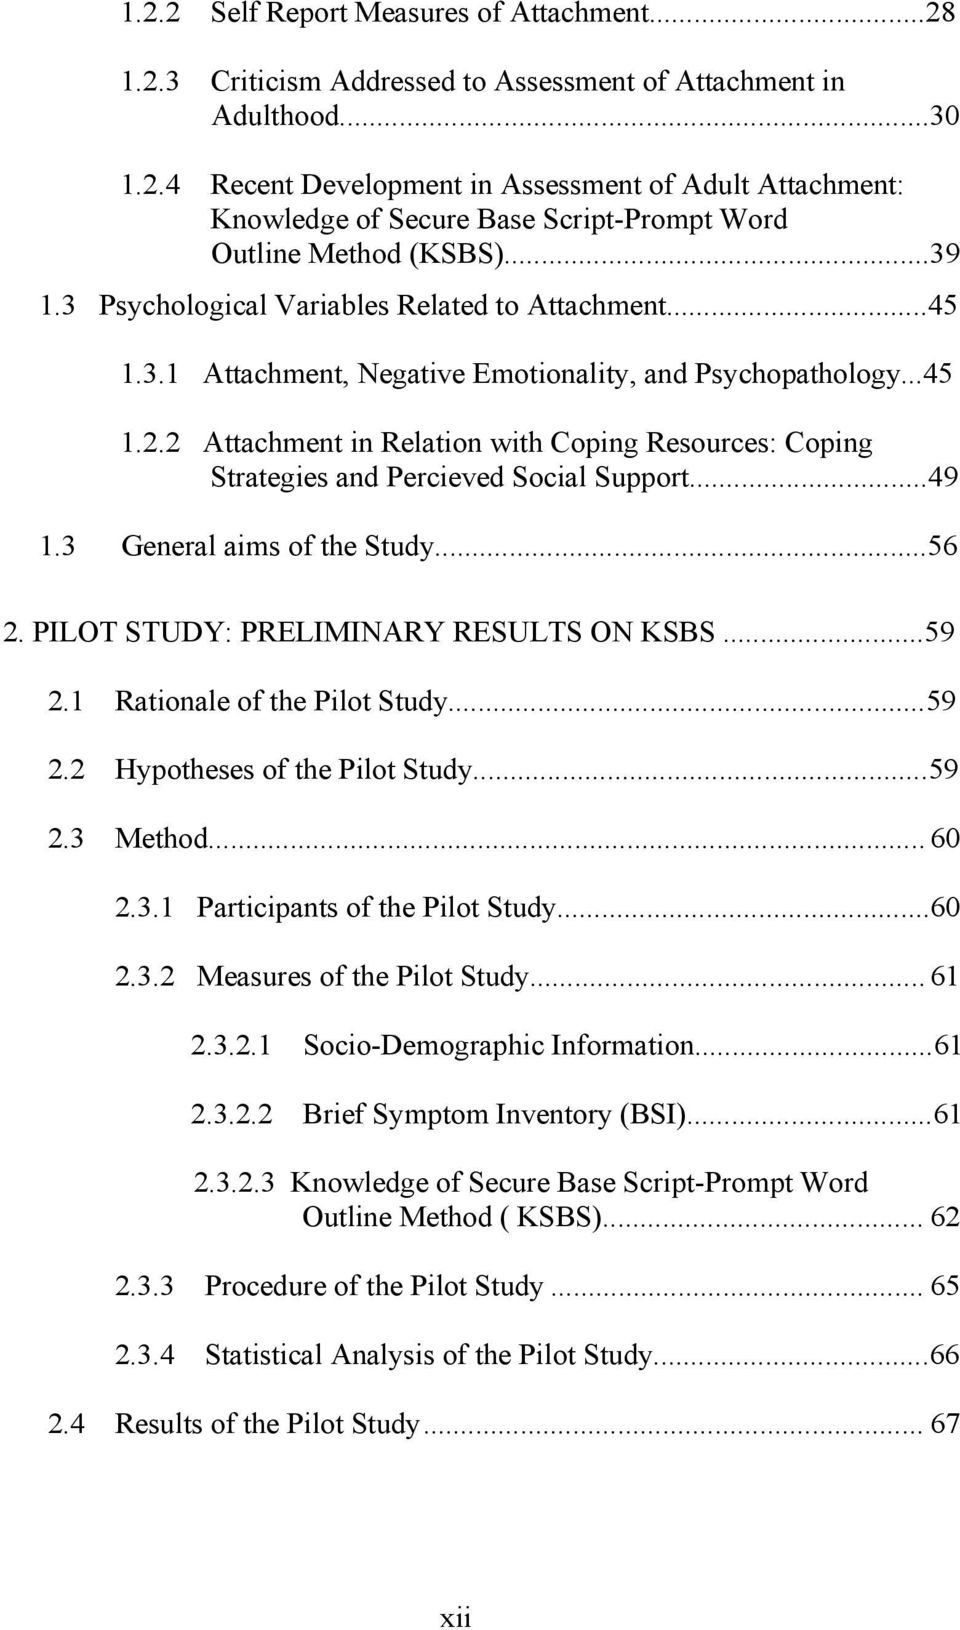 2 Attachment in Relation with Coping Resources: Coping Strategies and Percieved Social Support...49 1.3 General aims of the Study...56 2. PILOT STUDY: PRELIMINARY RESULTS ON KSBS...59 2.